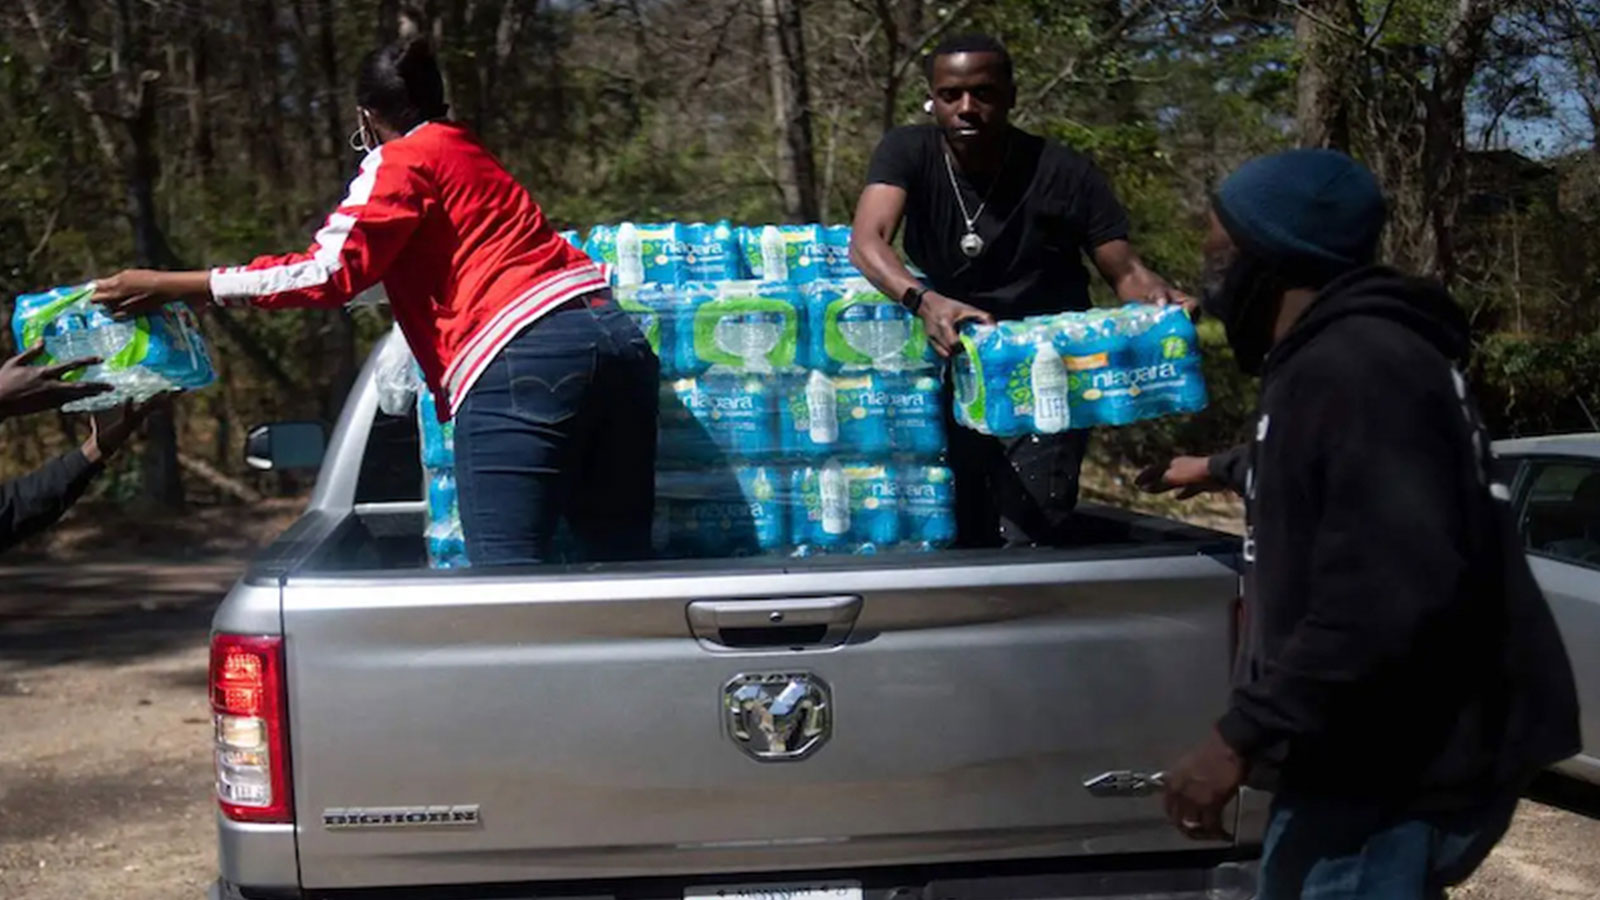 Jackson’s water crisis was triggered by floods and compounded by racism